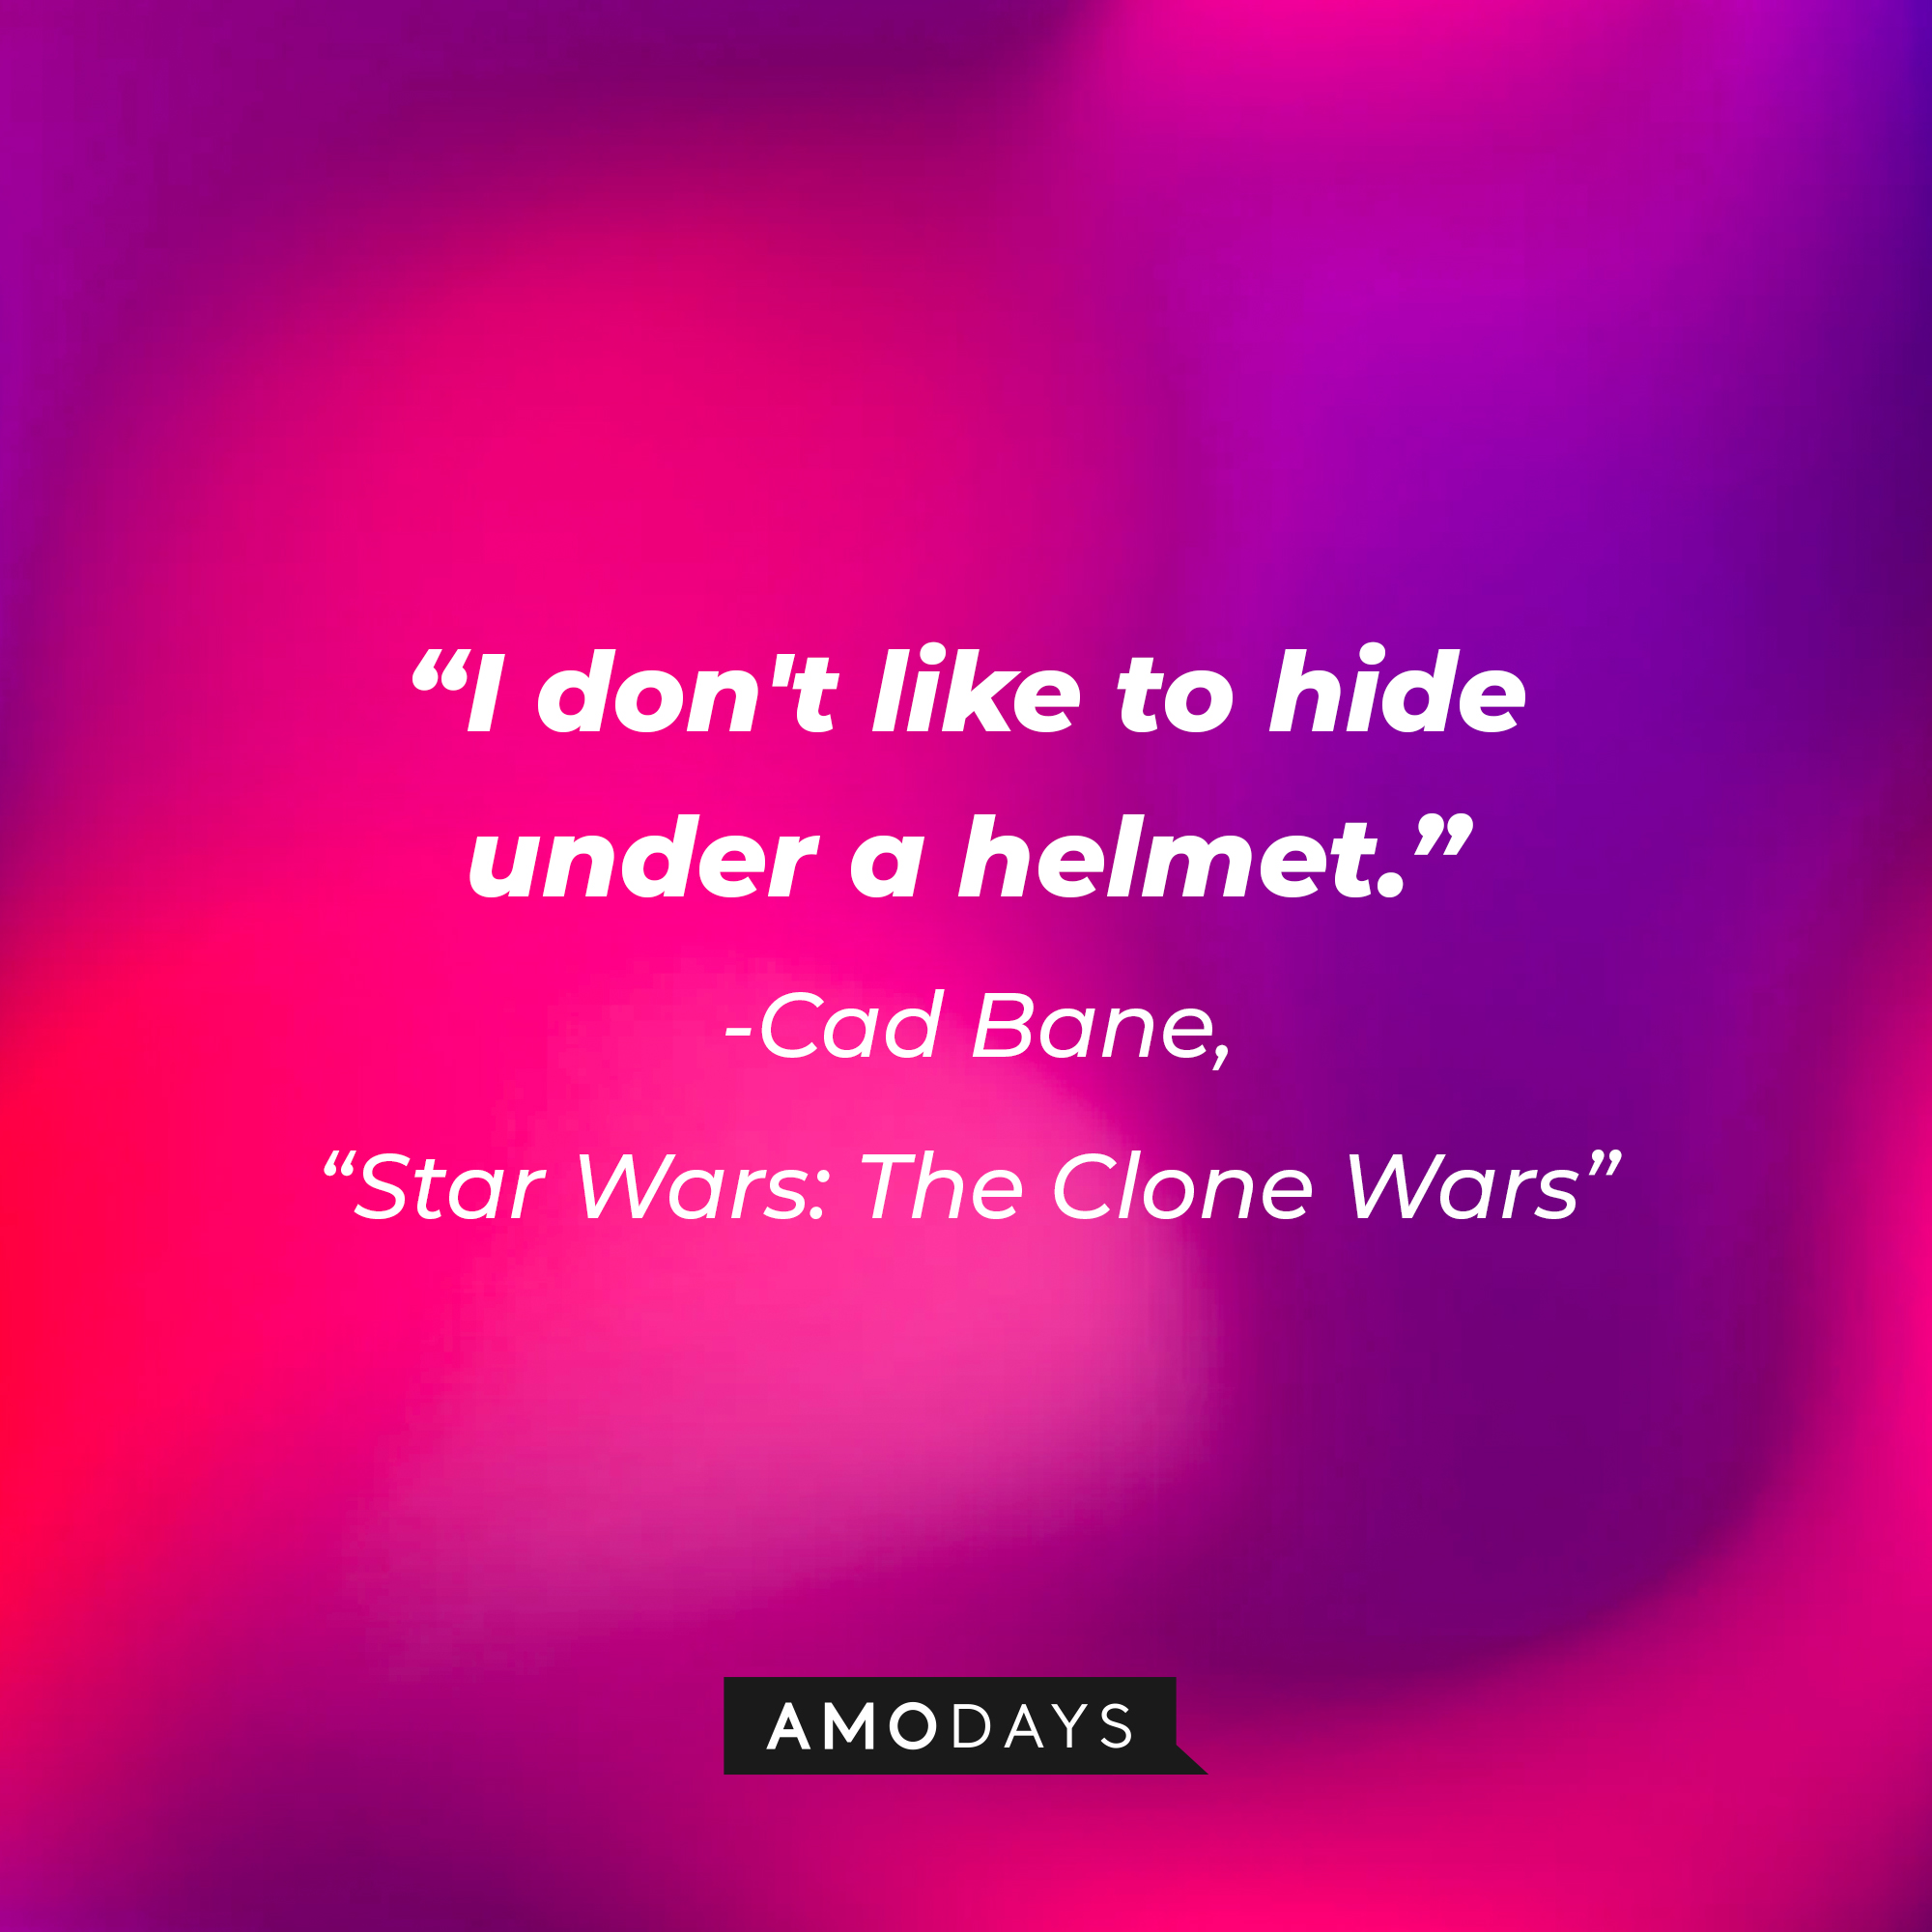 Cad Bane’s quote:  "I don't like to hide under a helmet. | Image: AmoDays Wars"